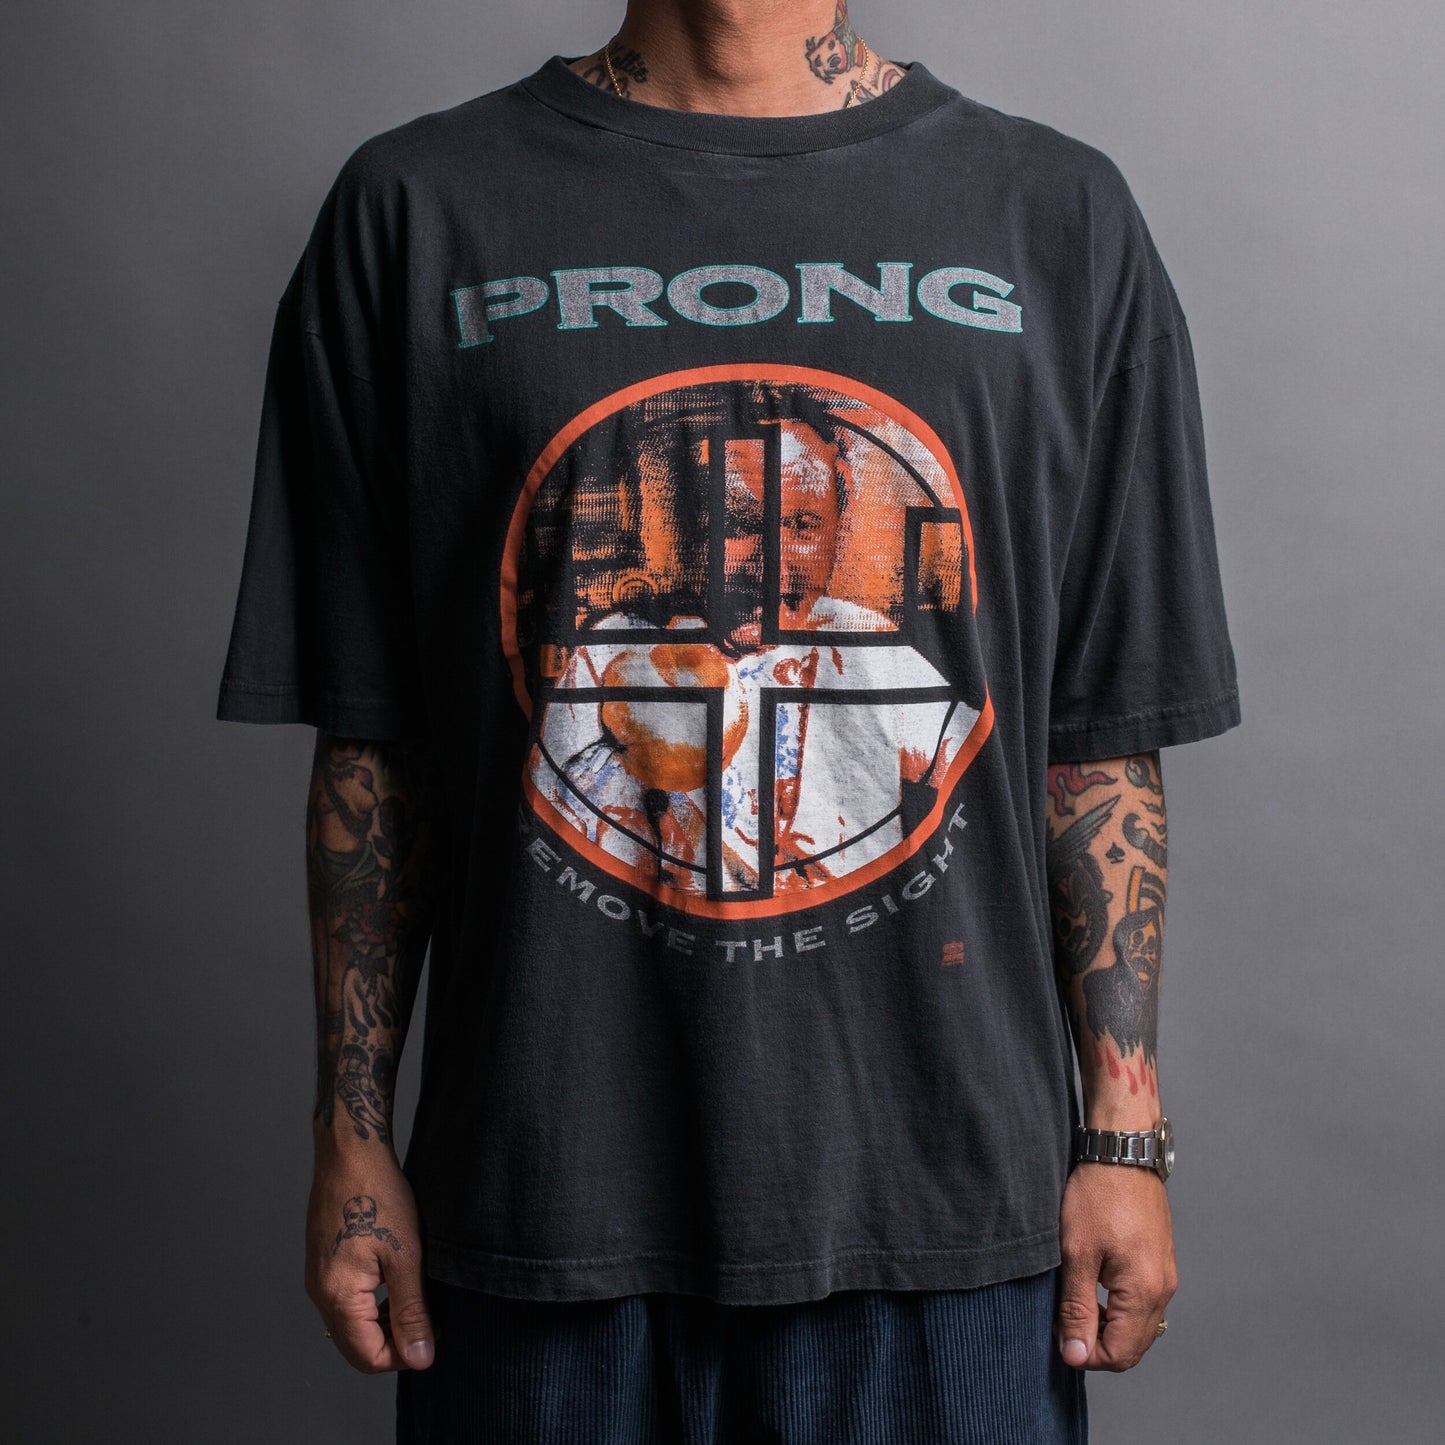 Vintage 1994 Prong Remove From The Sight Tour T-Shirt